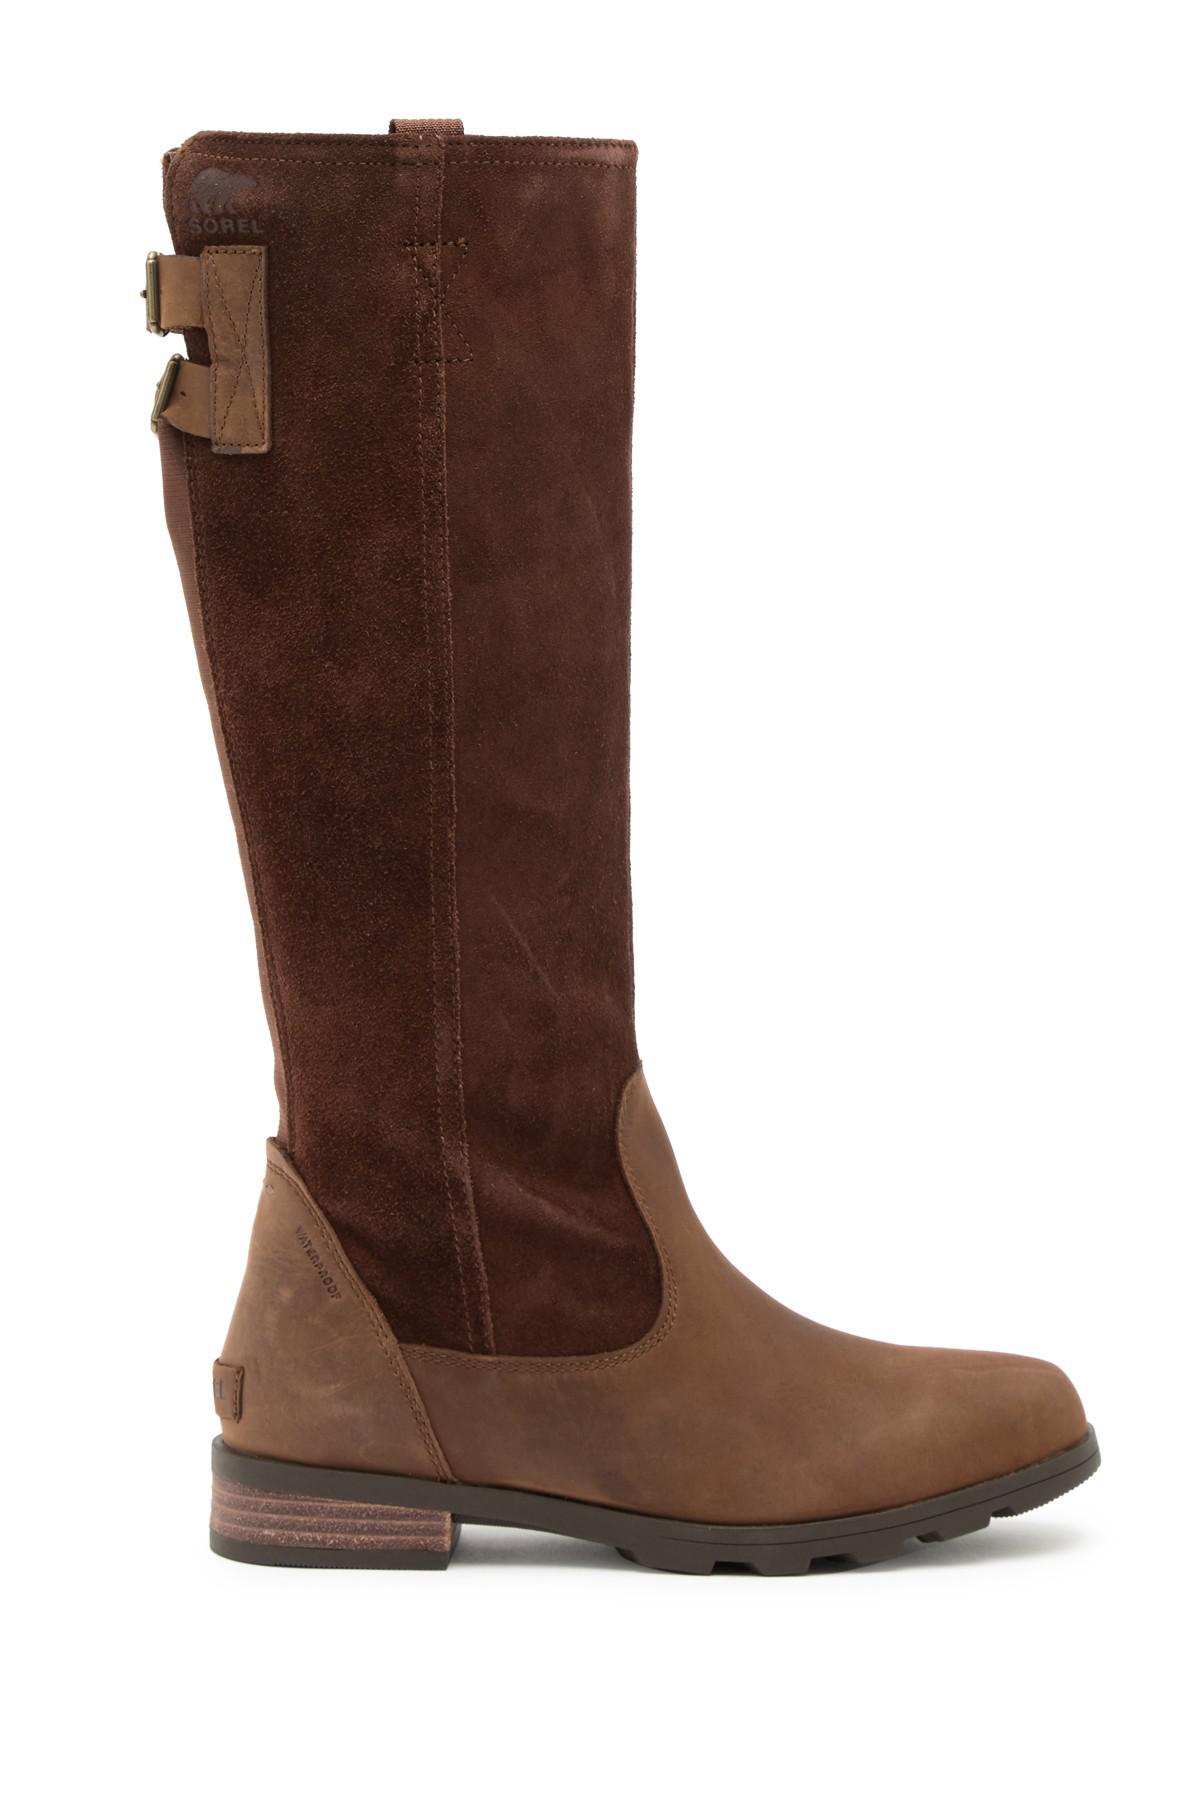 Sorel Leather Emelie Tall Boot in Brown - Lyst